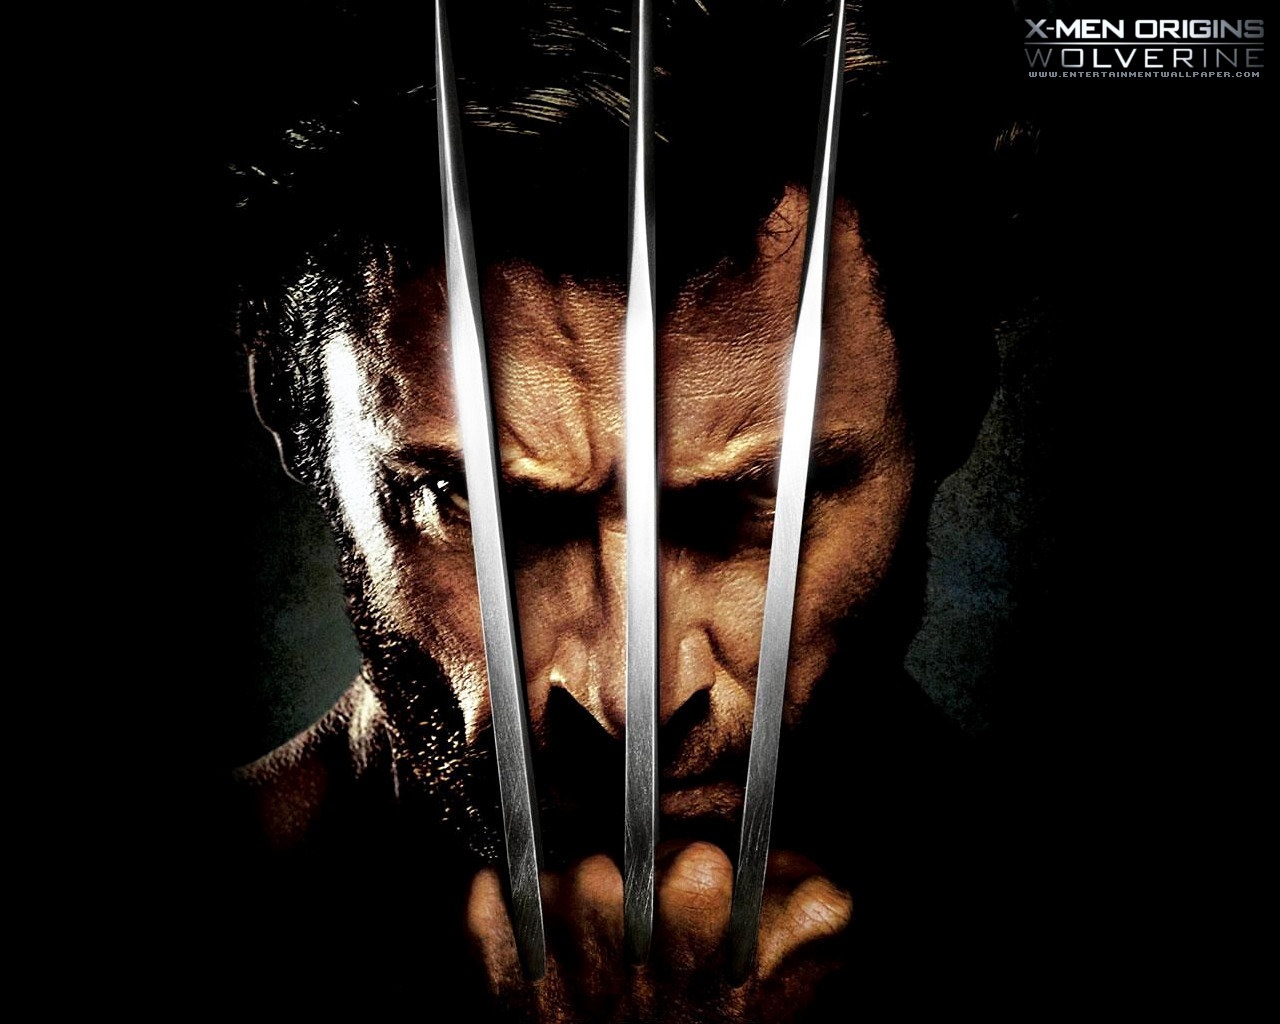 To These High Quality X Men Origins Wolverine Wallpaper